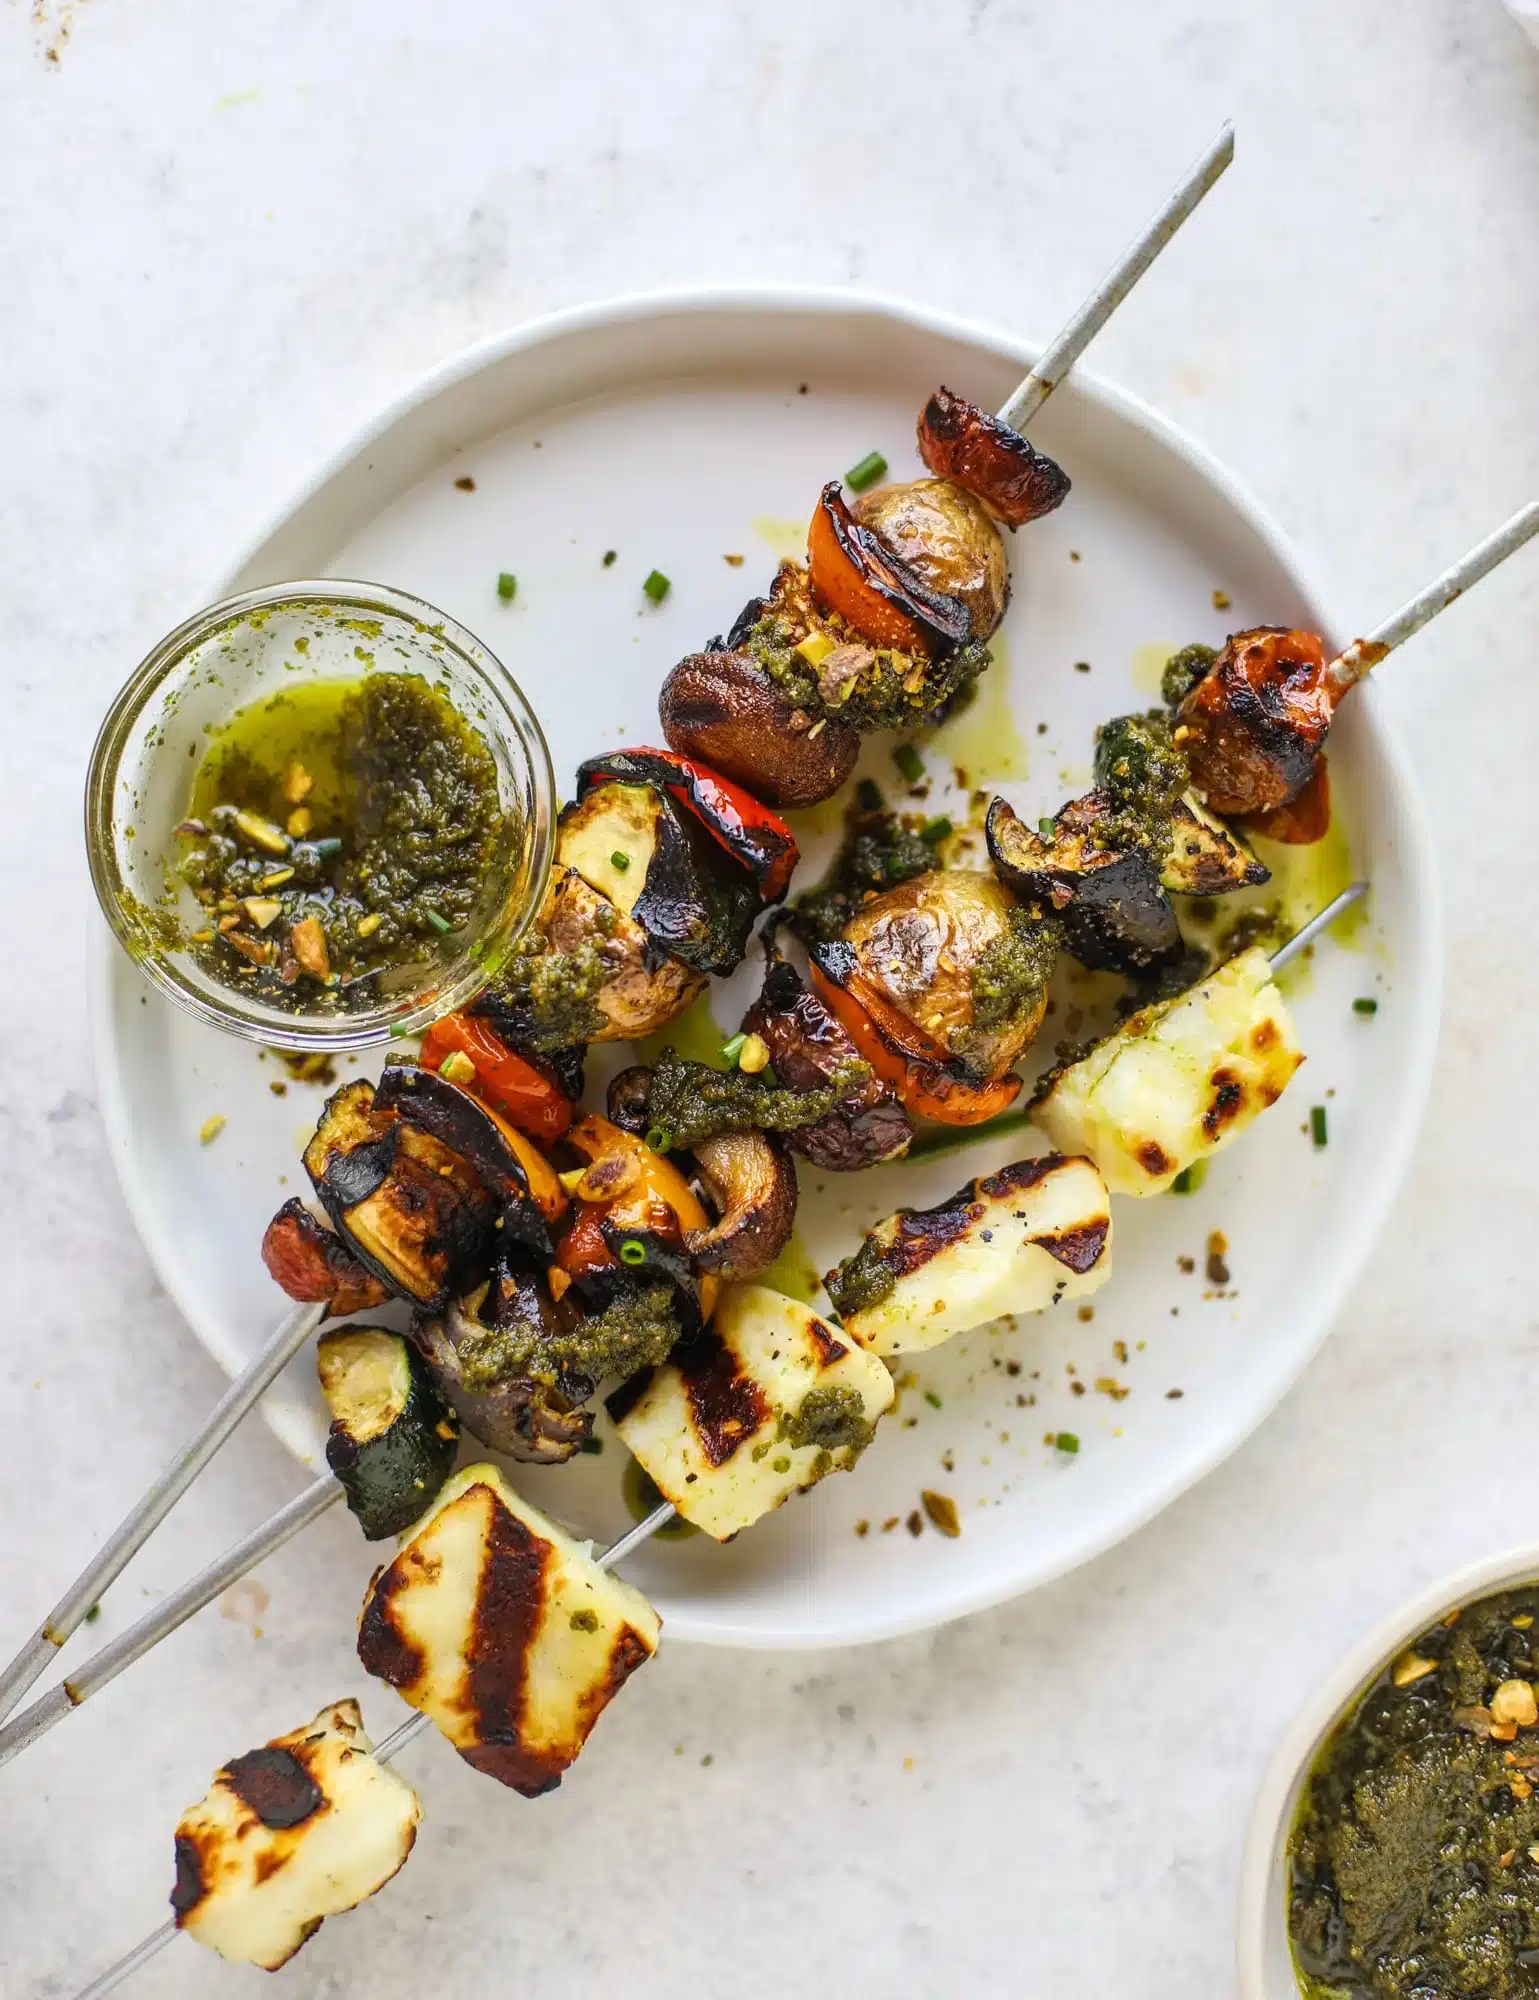 Grilled vegetable and halloumi cheese skewers served with a side of herb sauce.